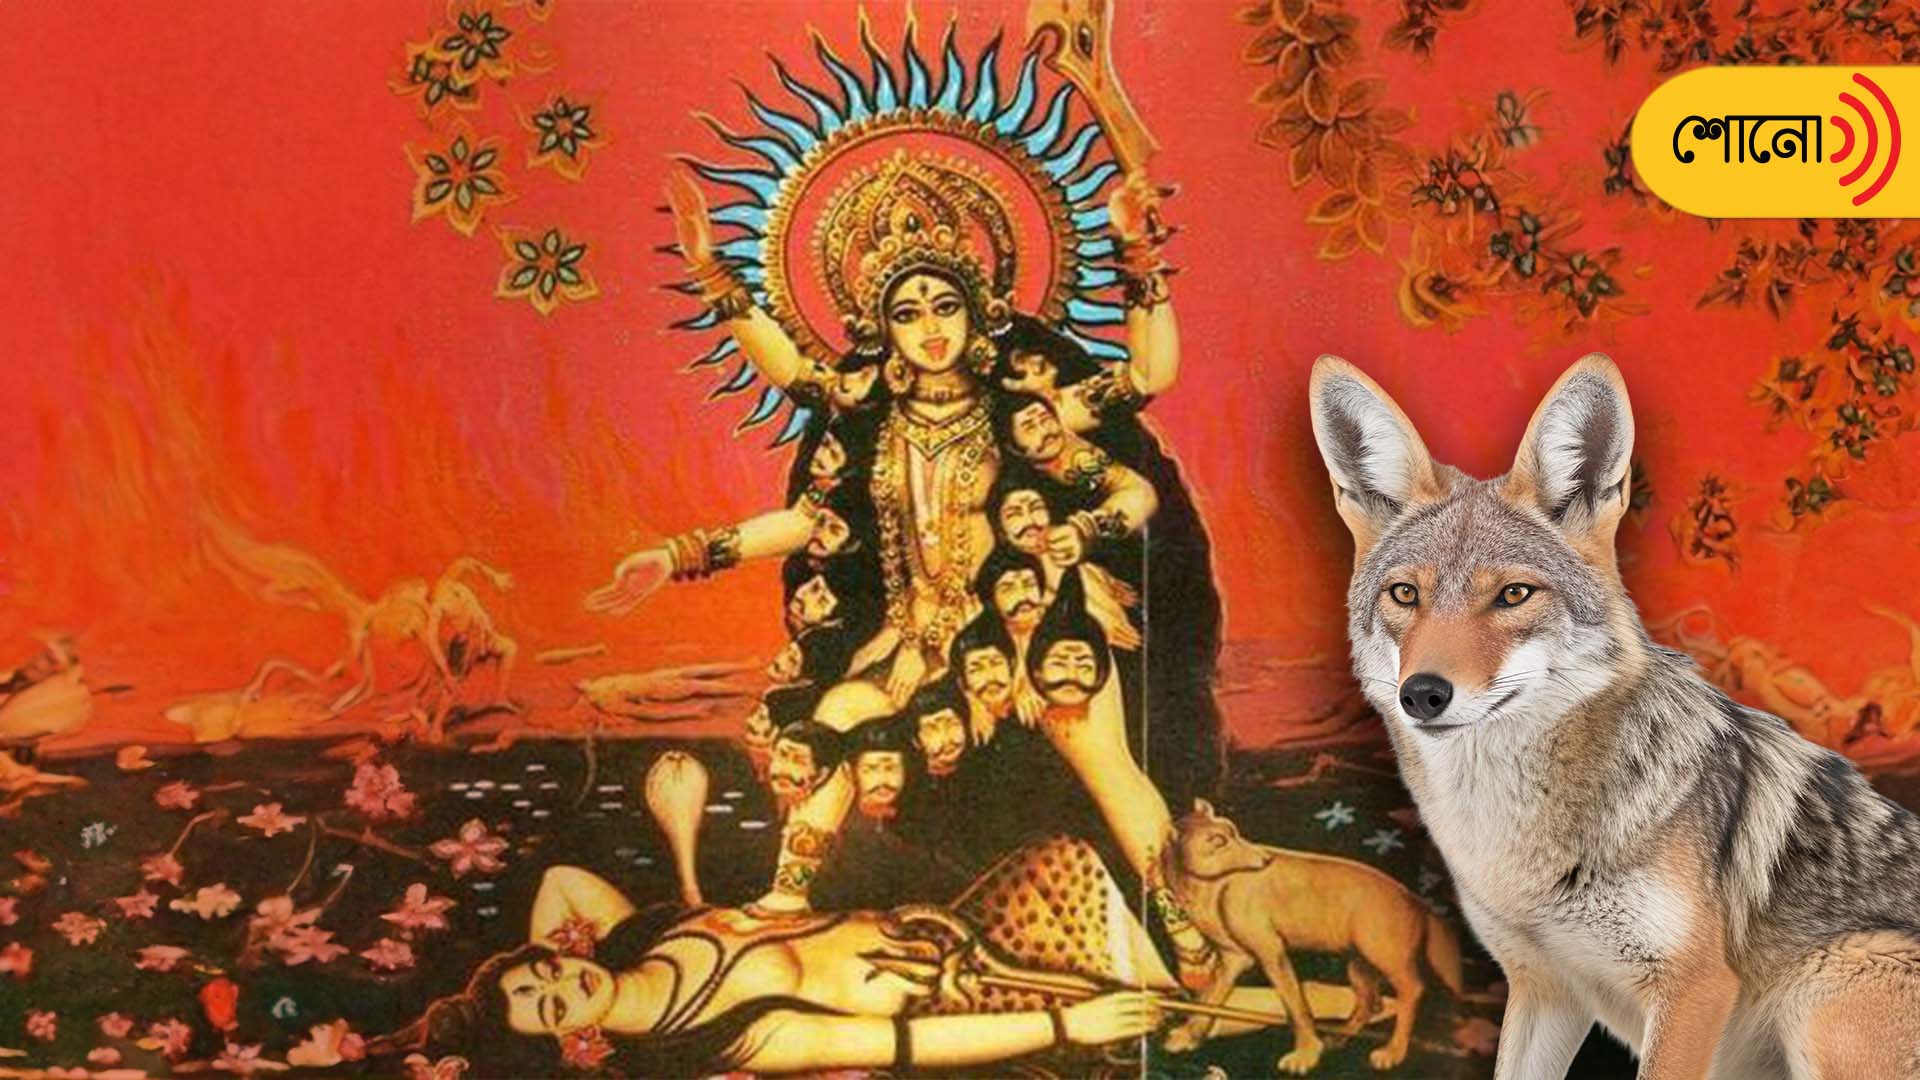 know more about Devi kali & the significance of jackal with her